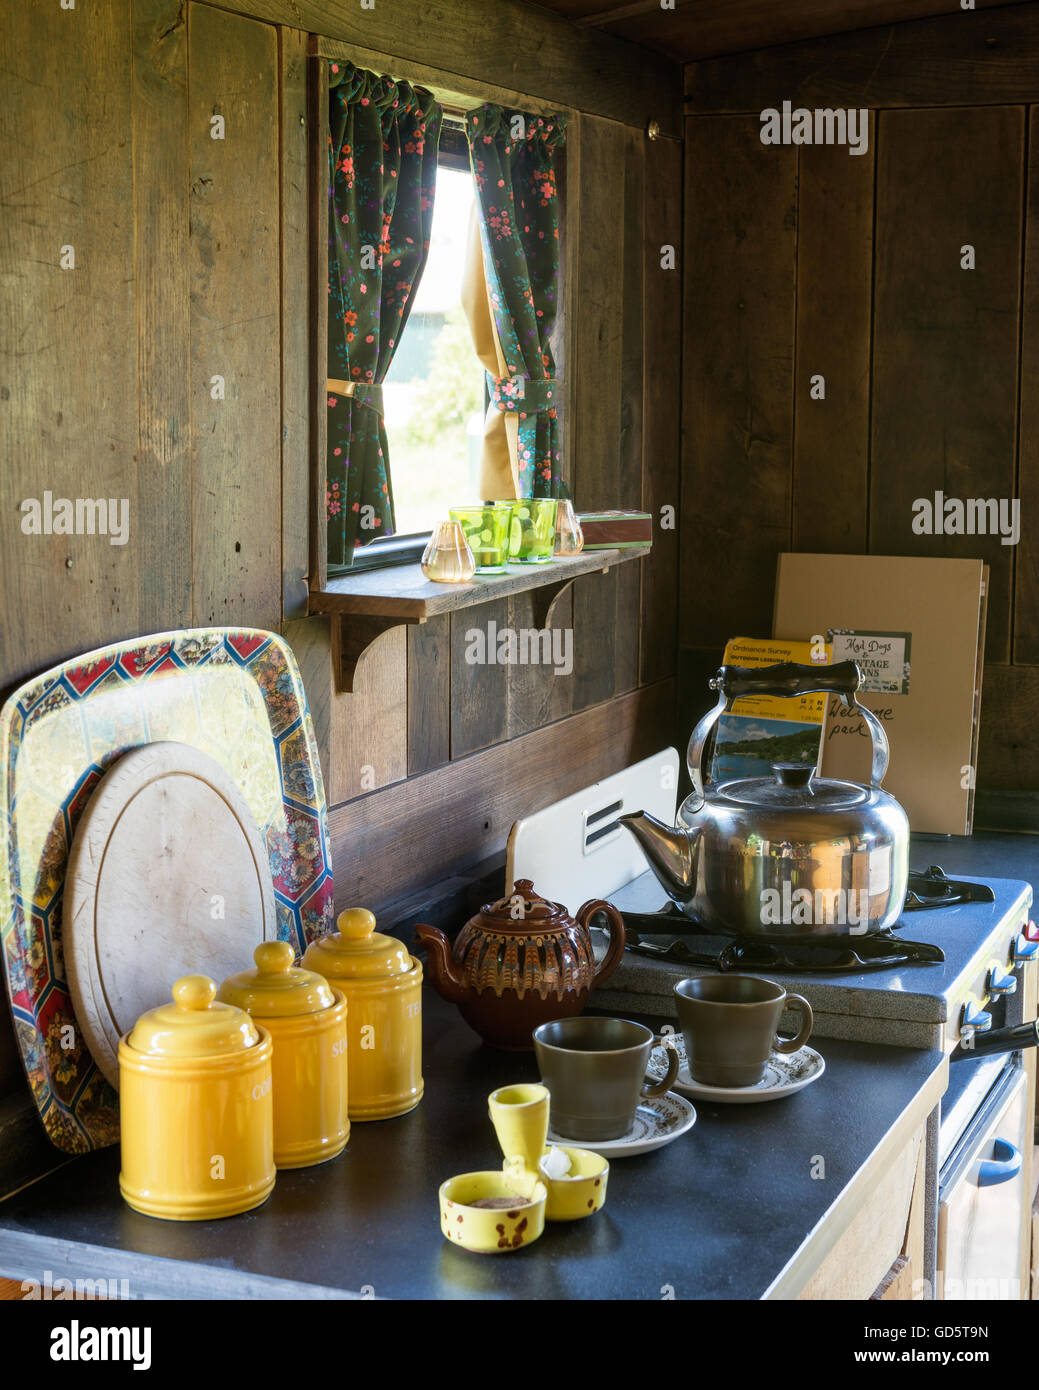 Wood clad kitchenette of converted military wagon with stive, kettle, and chintz details Stock Photo